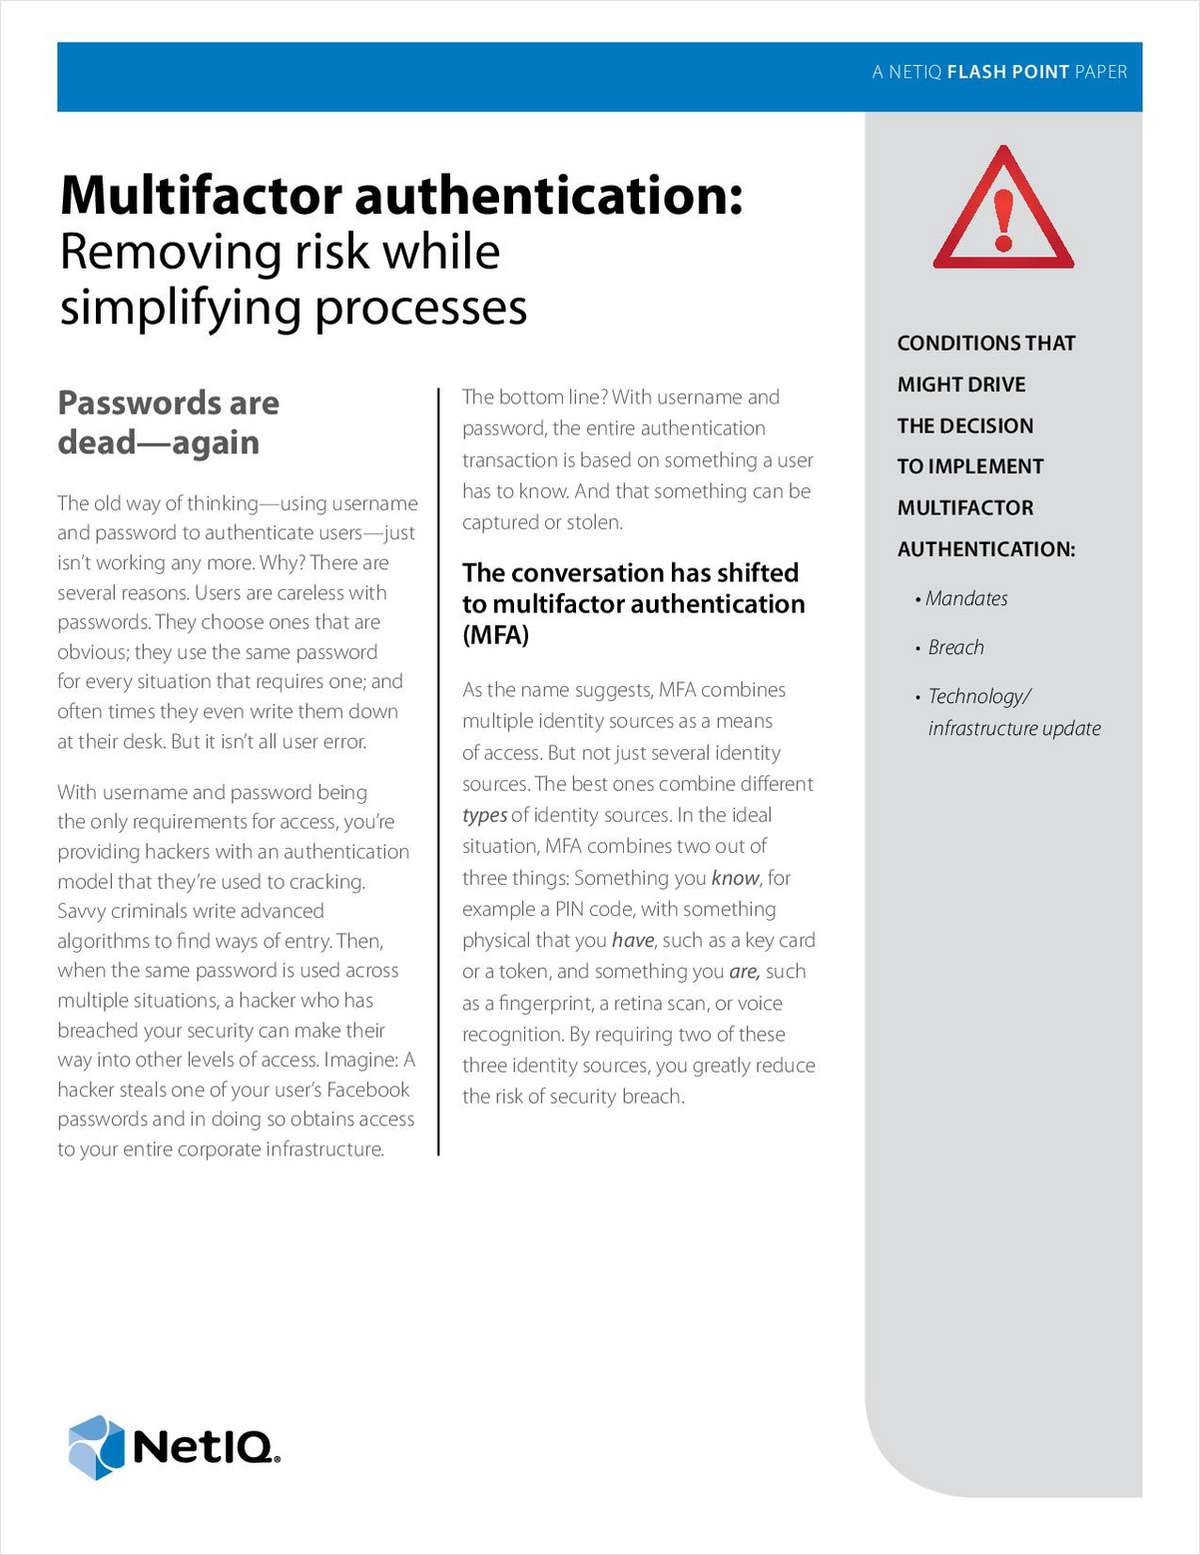 Remove Risk and Simplify with Multifactor Authentication